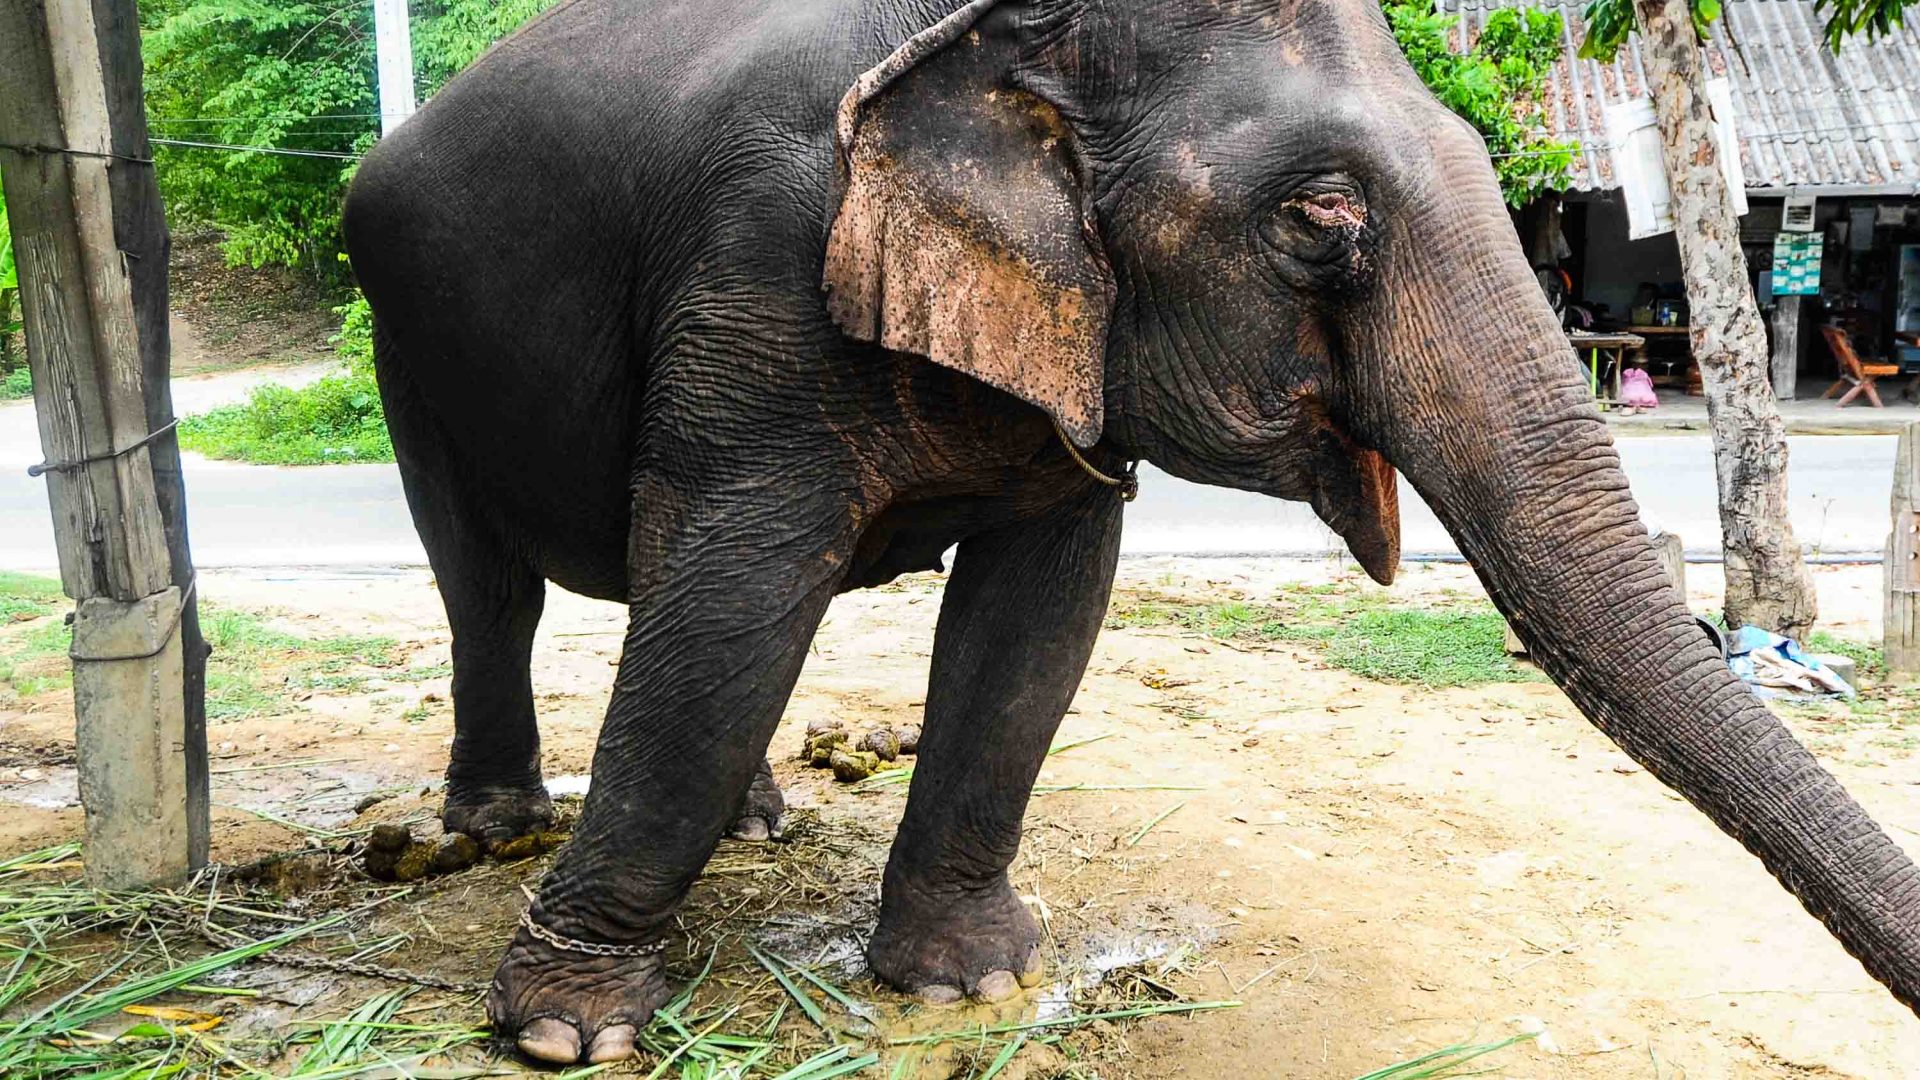 A chained elephant at the edge of the road.